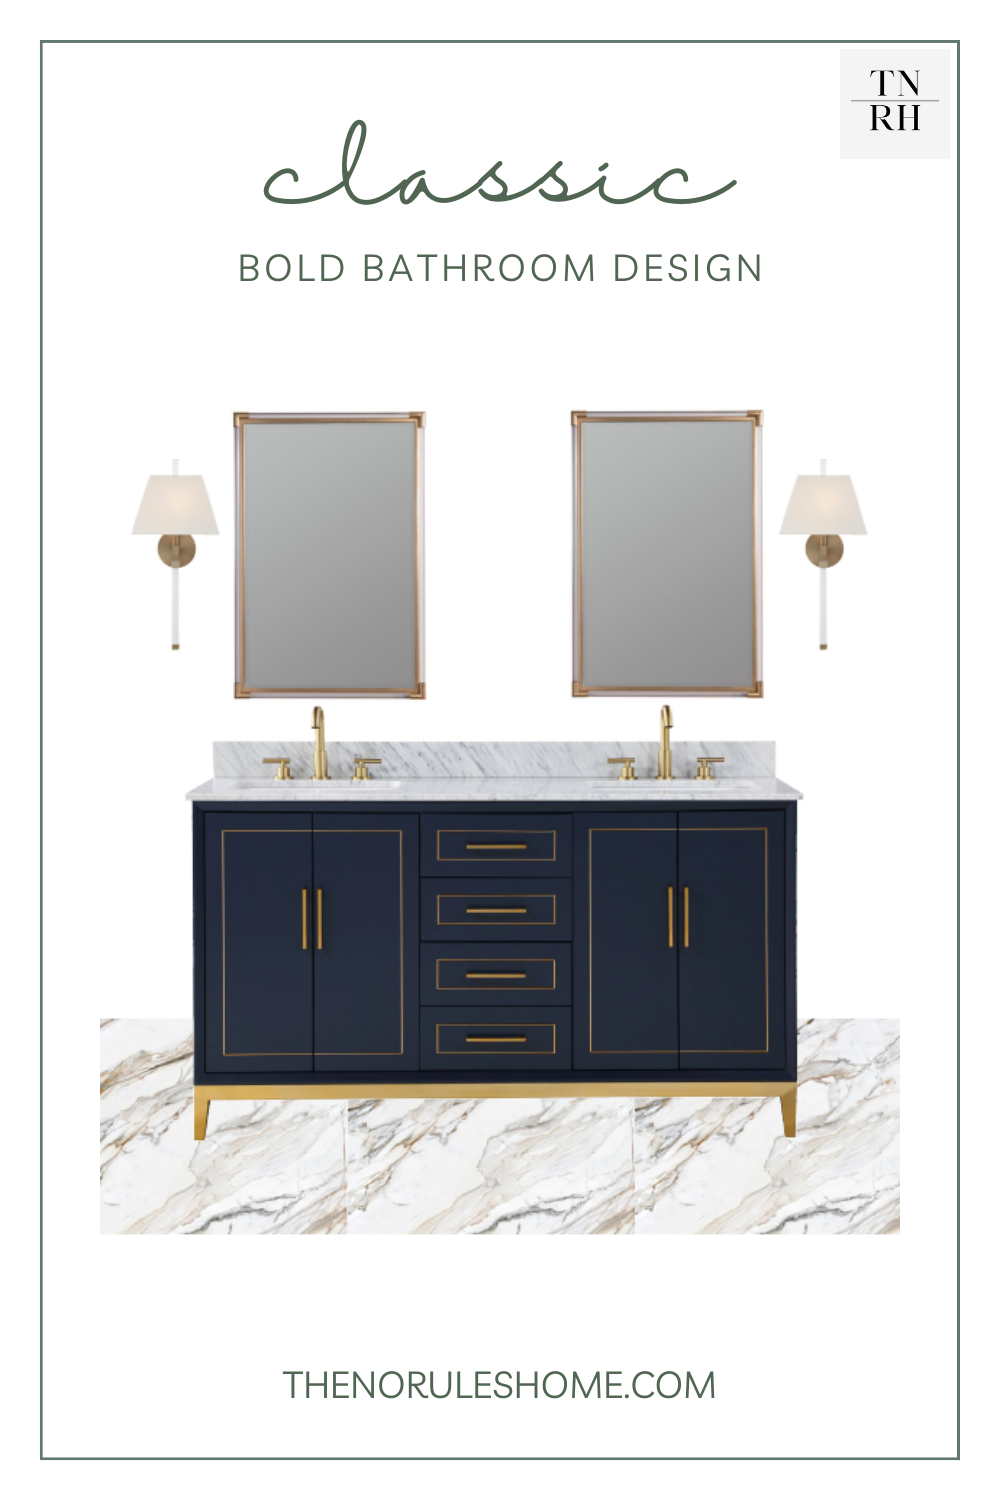 A bathroom design with marble flooring, navy and gold vanity, gold mirror and wall sconces